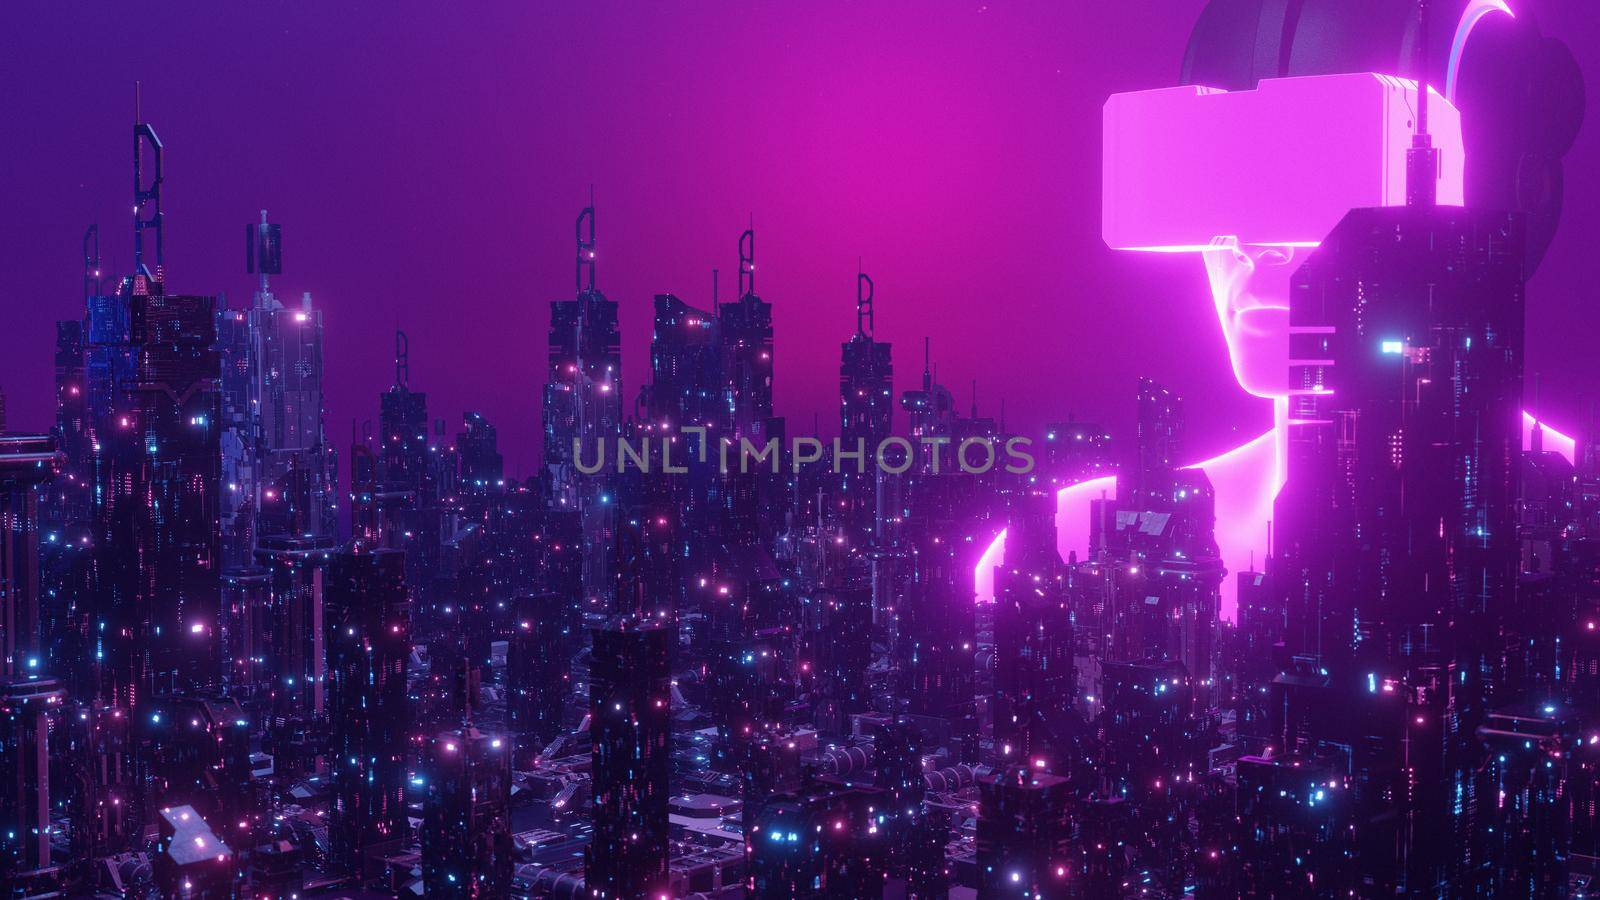 Metaverse VR Virtual Reality Big Data Connection Technology. Smart City Digital Transformation.Telecommunication And Communication Concept Background 3d Render